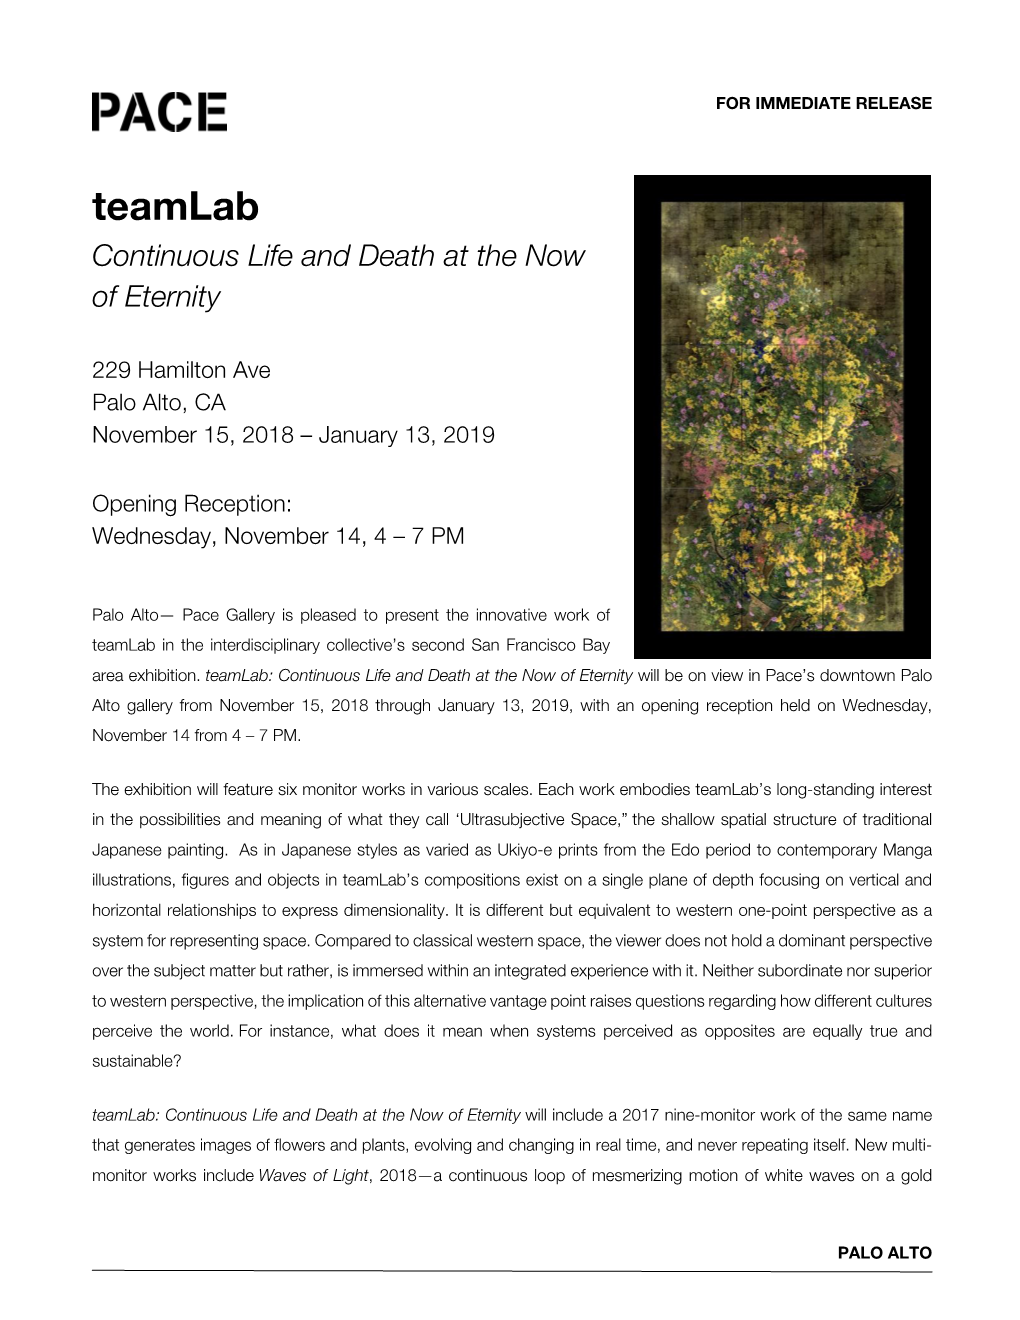 Teamlab Continuous Life and Death at the Now of Eternity